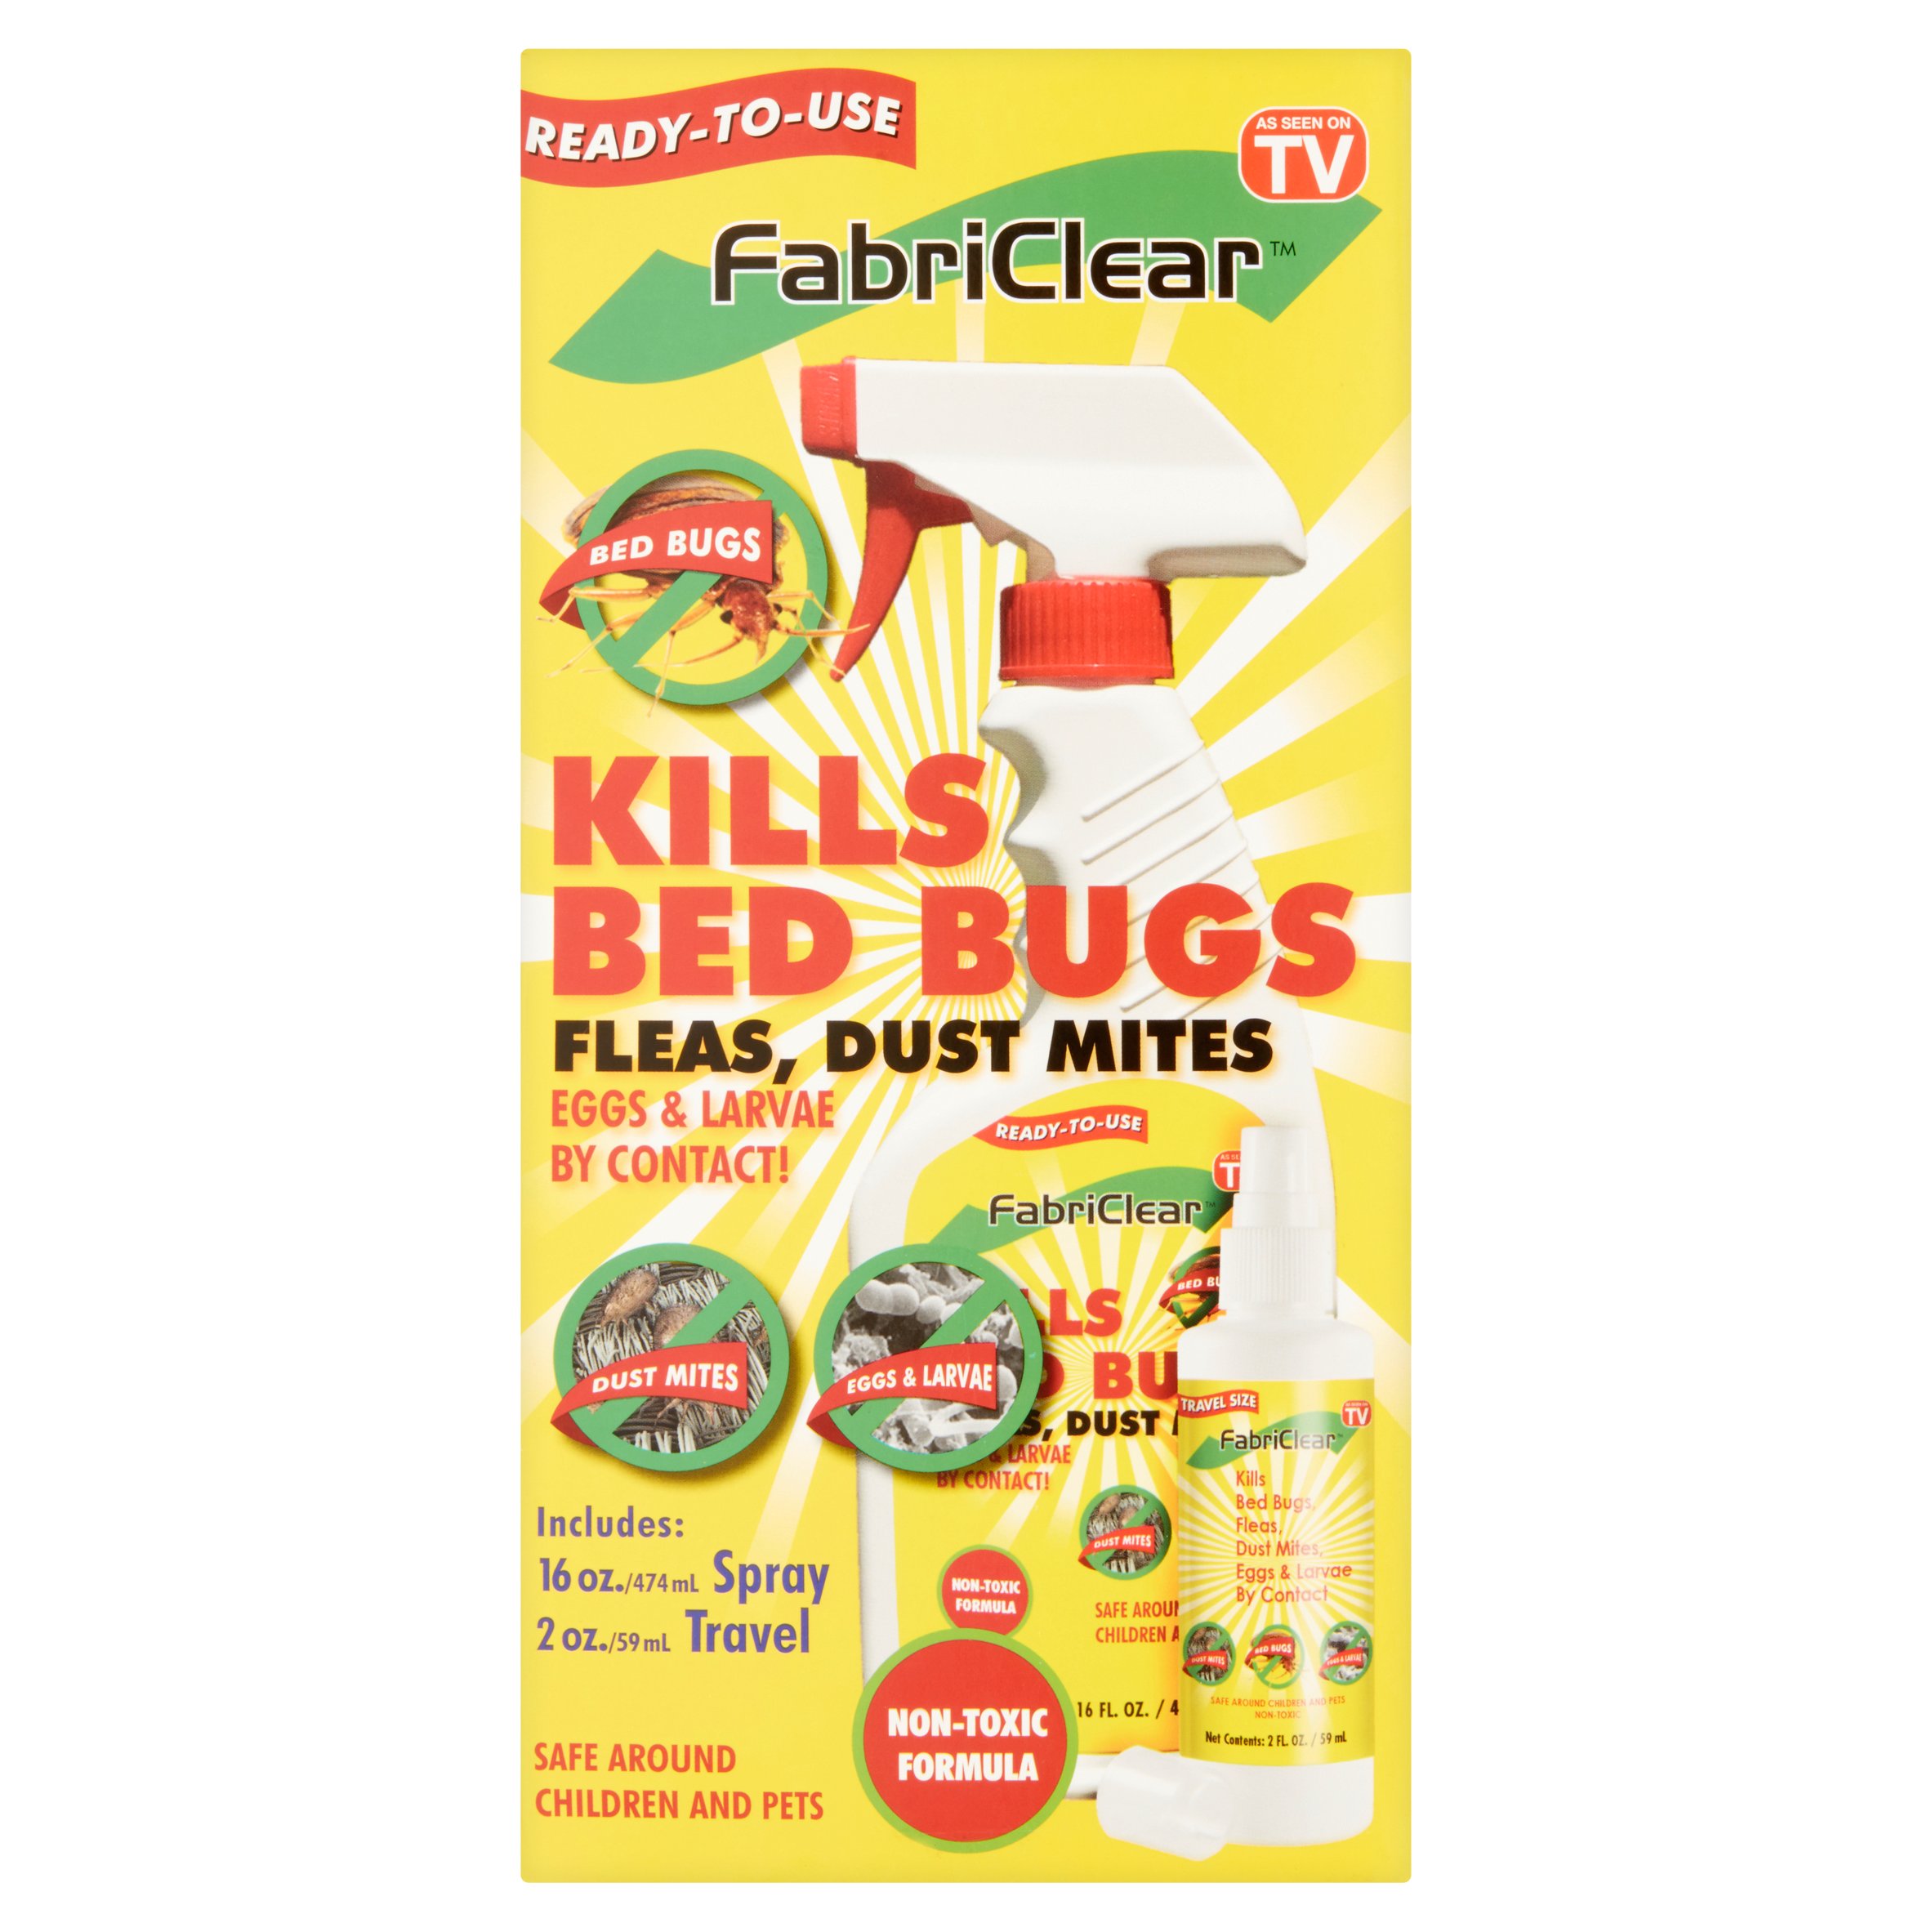 As Seen on TV FabriClear for Bed Bugs - image 1 of 5